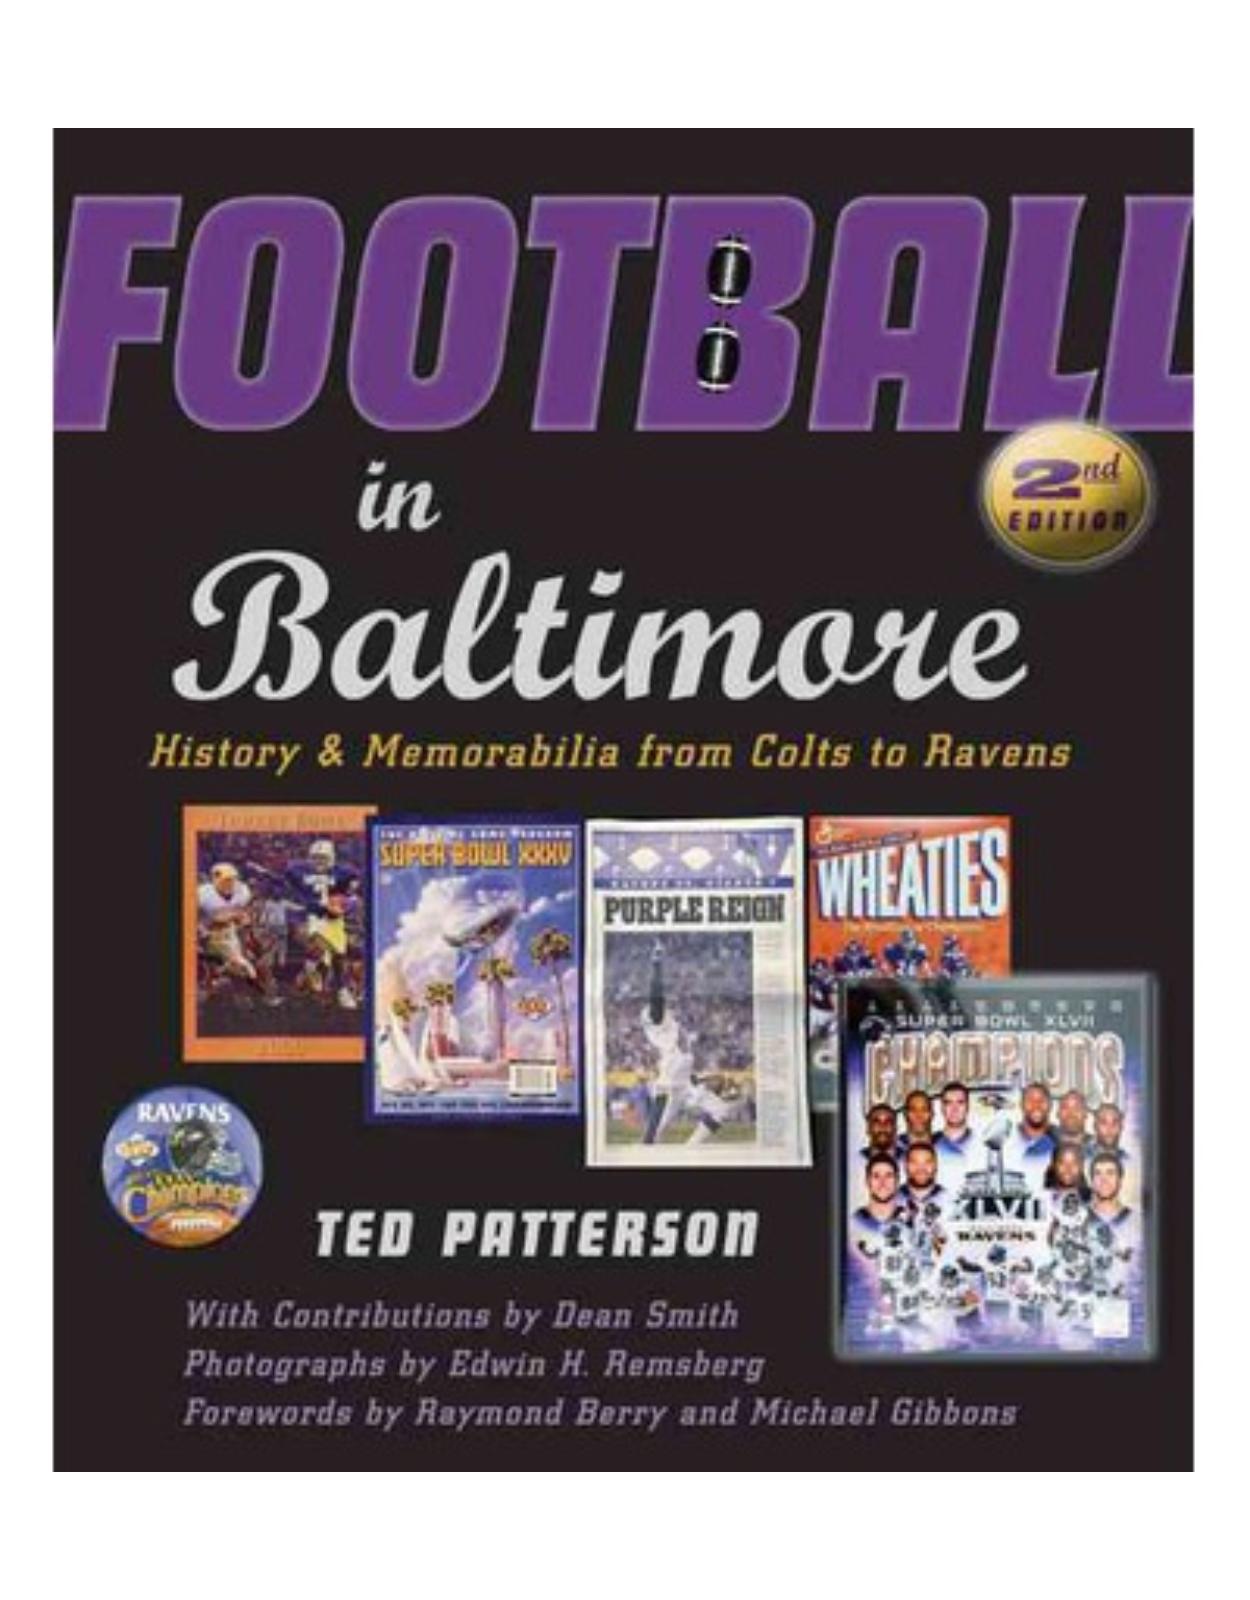 Football in Baltimore. History and Memorabilia from Colts to Ravens (Second Edition)